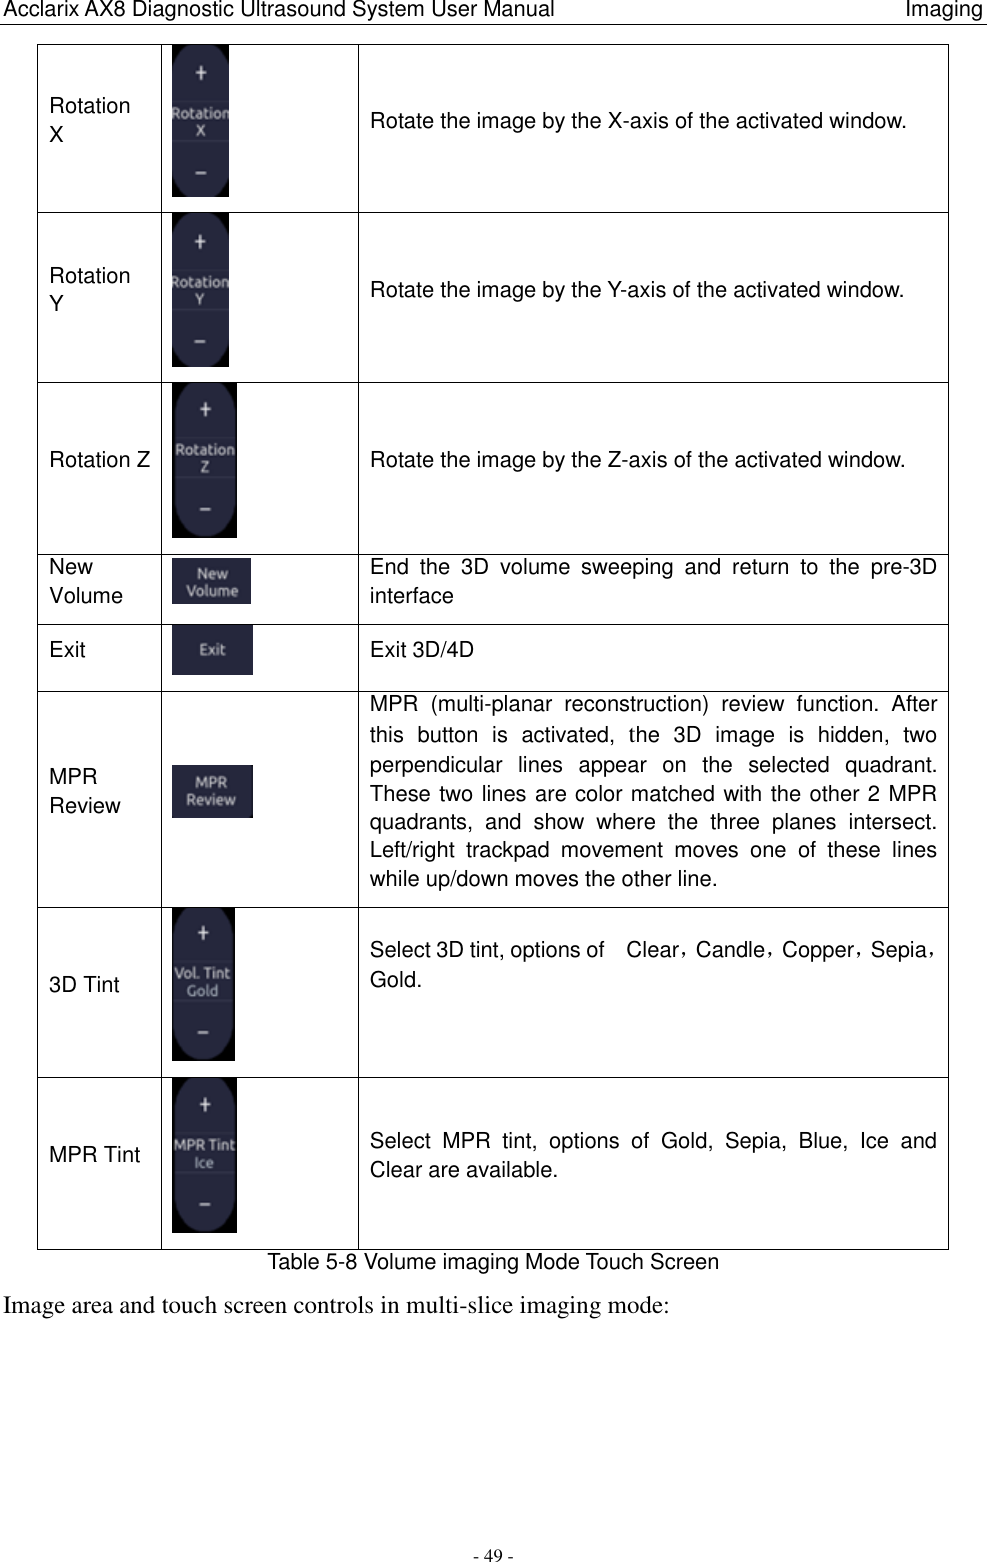 Acclarix AX8 Diagnostic Ultrasound System User Manual                                                                Imaging - 49 - Table 5-8 Volume imaging Mode Touch Screen Image area and touch screen controls in multi-slice imaging mode: Rotation X  Rotate the image by the X-axis of the activated window. Rotation Y  Rotate the image by the Y-axis of the activated window. Rotation Z  Rotate the image by the Z-axis of the activated window. New Volume  End  the  3D  volume  sweeping  and  return  to  the  pre-3D interface Exit  Exit 3D/4D MPR Review  MPR  (multi-planar  reconstruction)  review  function.  After this  button  is  activated,  the  3D  image  is  hidden,  two perpendicular  lines  appear  on  the  selected  quadrant. These two lines are color matched with the other 2 MPR quadrants,  and  show  where  the  three  planes  intersect. Left/right  trackpad  movement  moves  one  of  these  lines while up/down moves the other line.   3D Tint  Select 3D tint, options of    Clear，Candle，Copper，Sepia，Gold.  MPR Tint  Select  MPR  tint,  options  of  Gold,  Sepia,  Blue,  Ice  and Clear are available. 